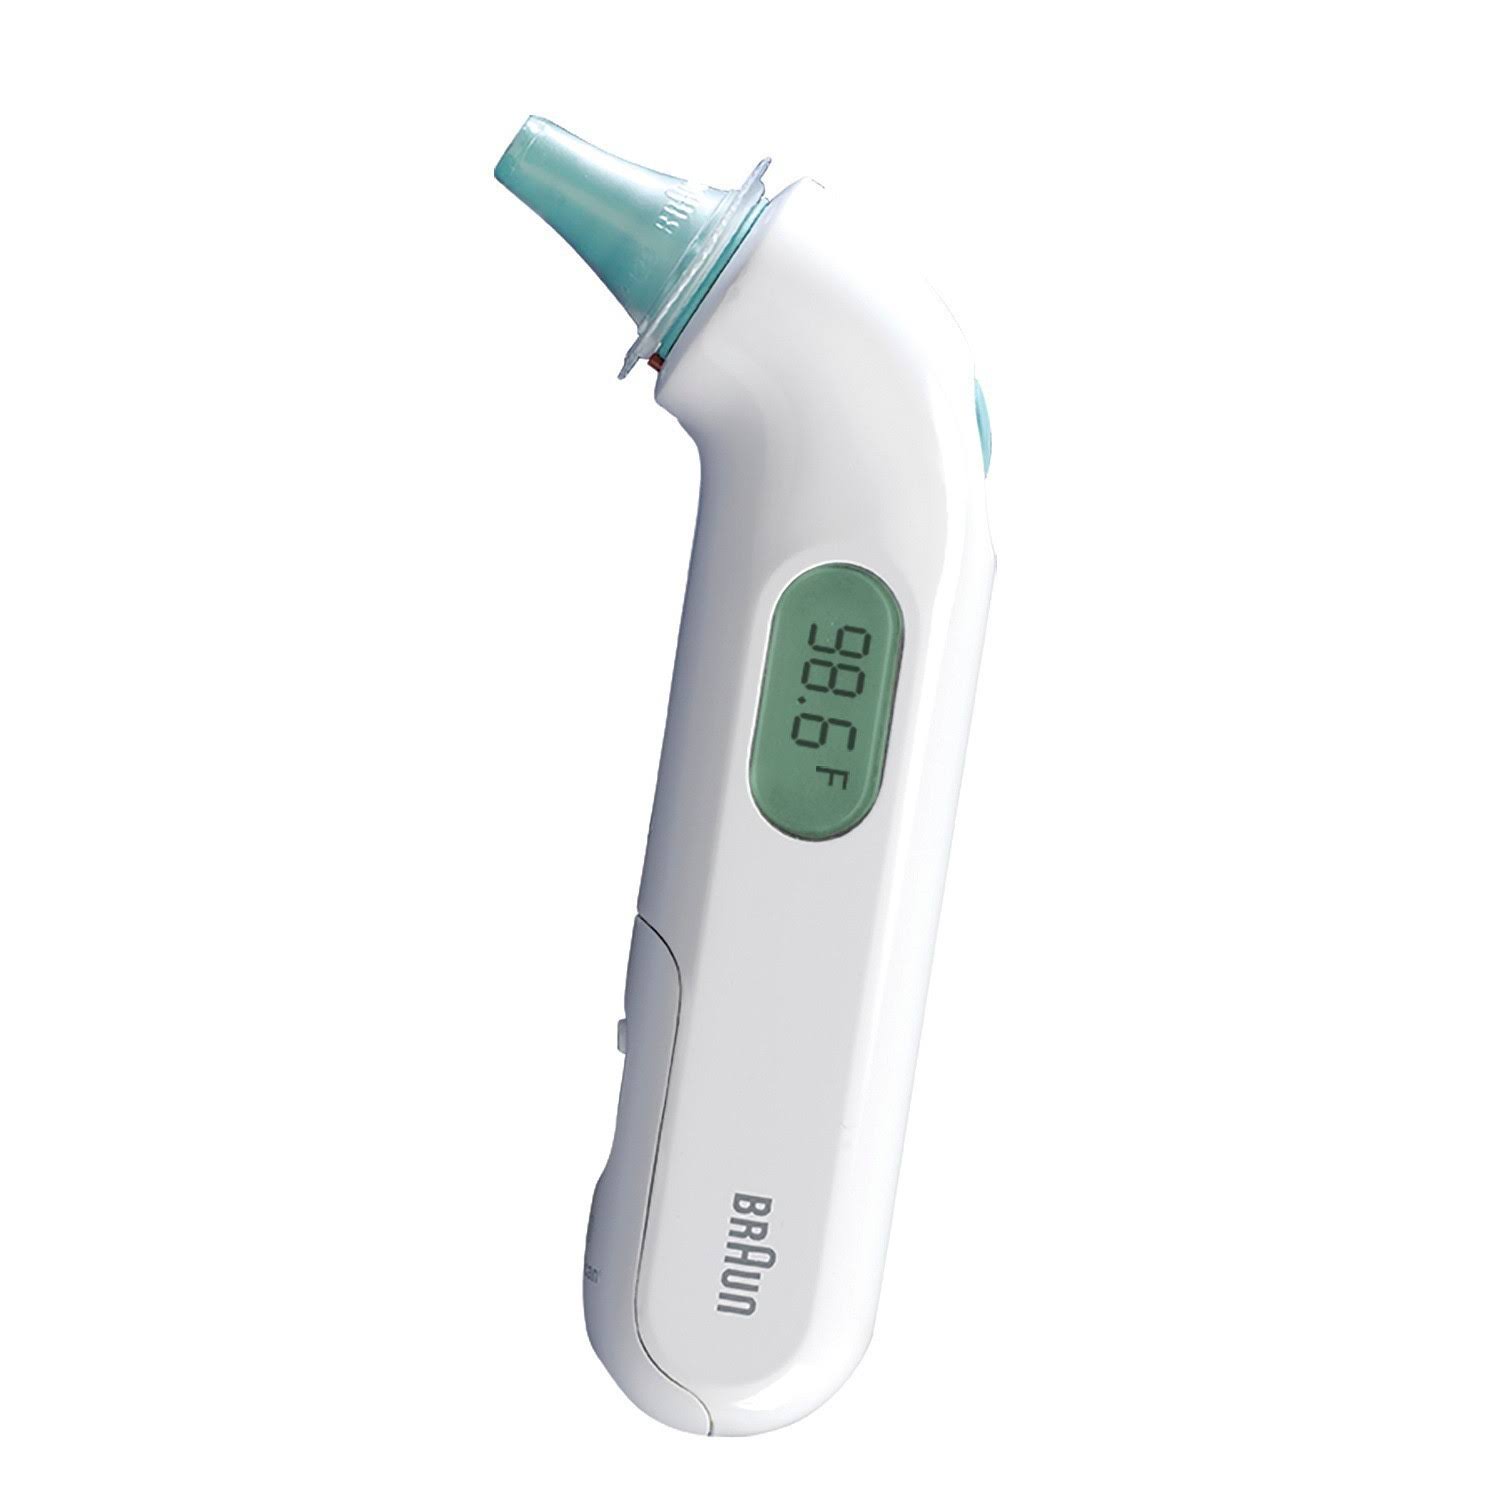 Braun ThermoScan 3 High Speed Compact Ear Thermometer - White, Green